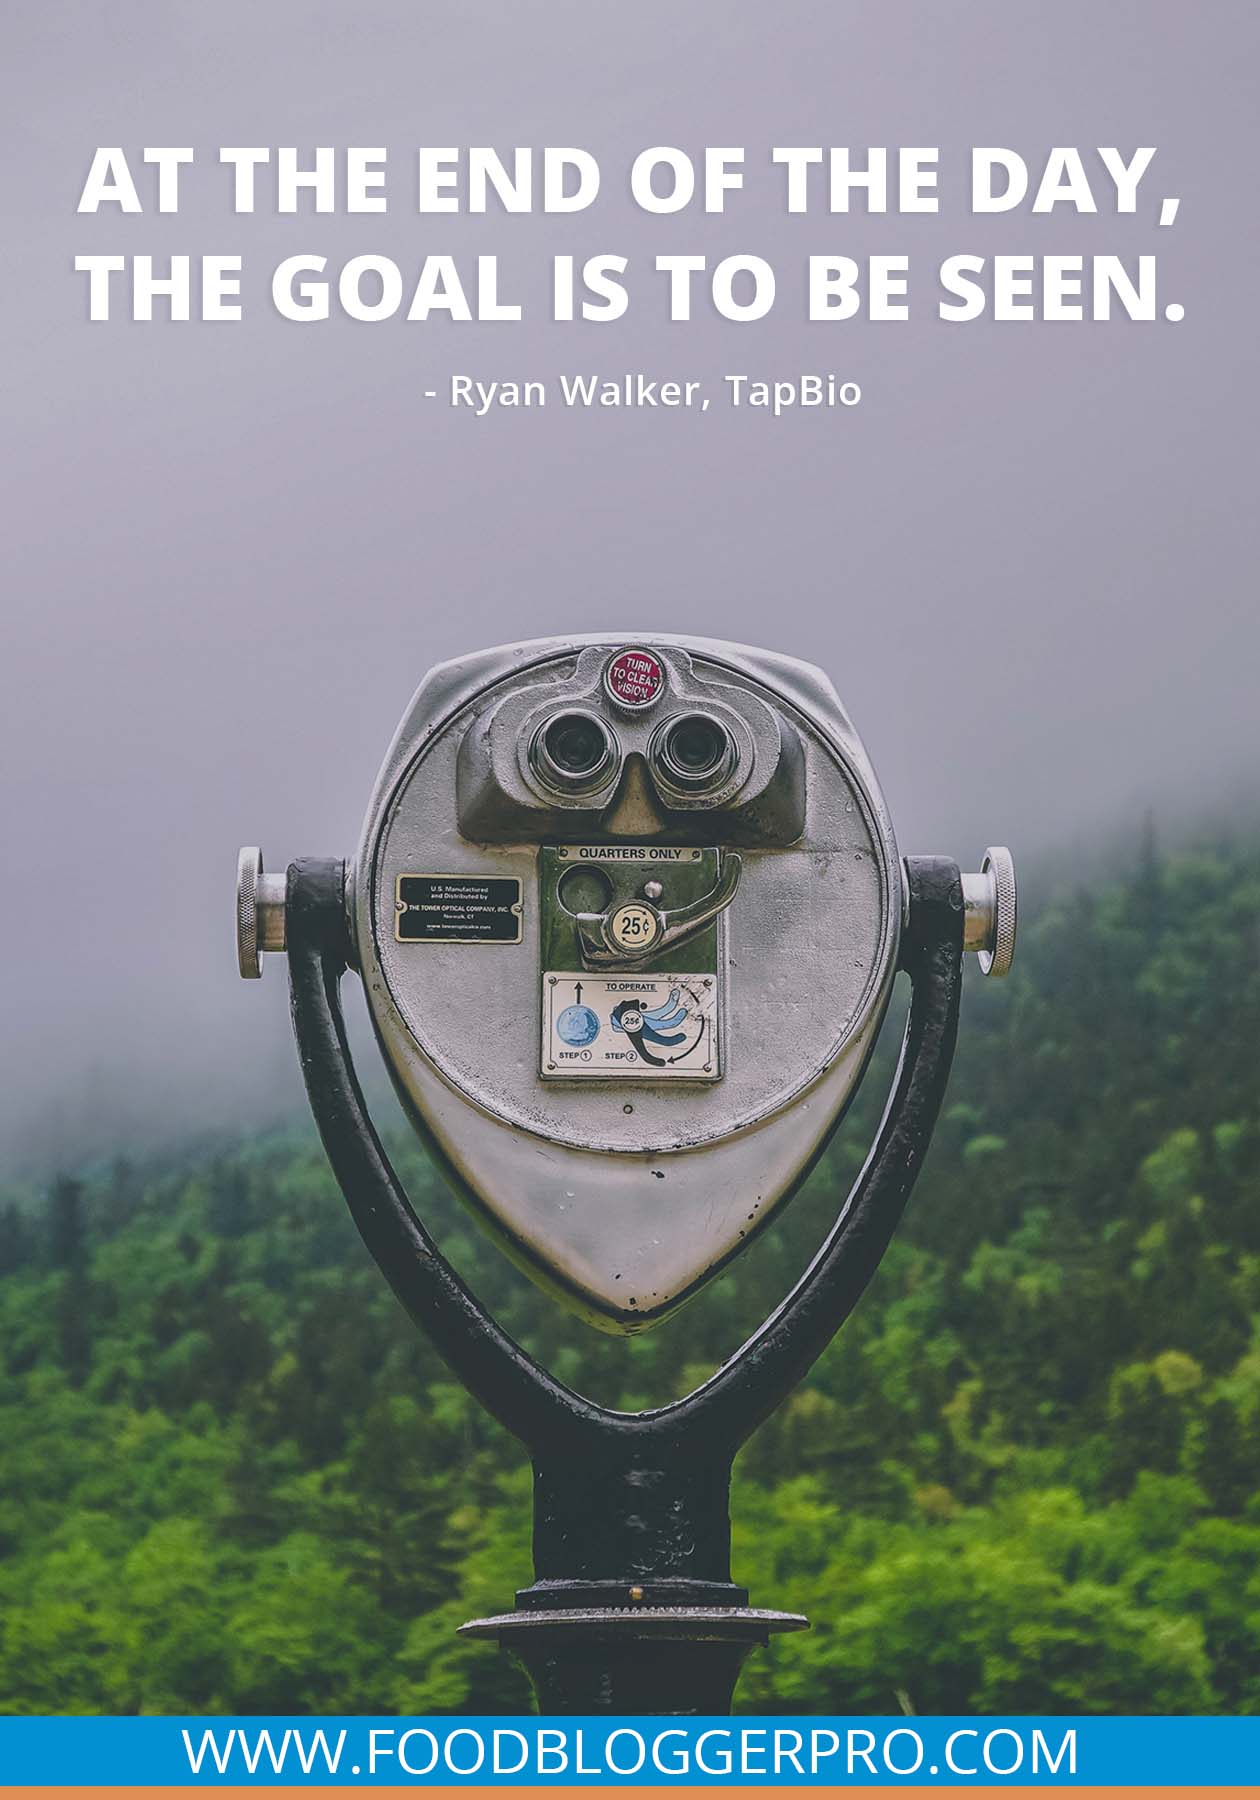 A quote from Ryan Walker’s appearance on the Food Blogger Pro podcast that says, 'At the end of the day, the goal is to be seen.'